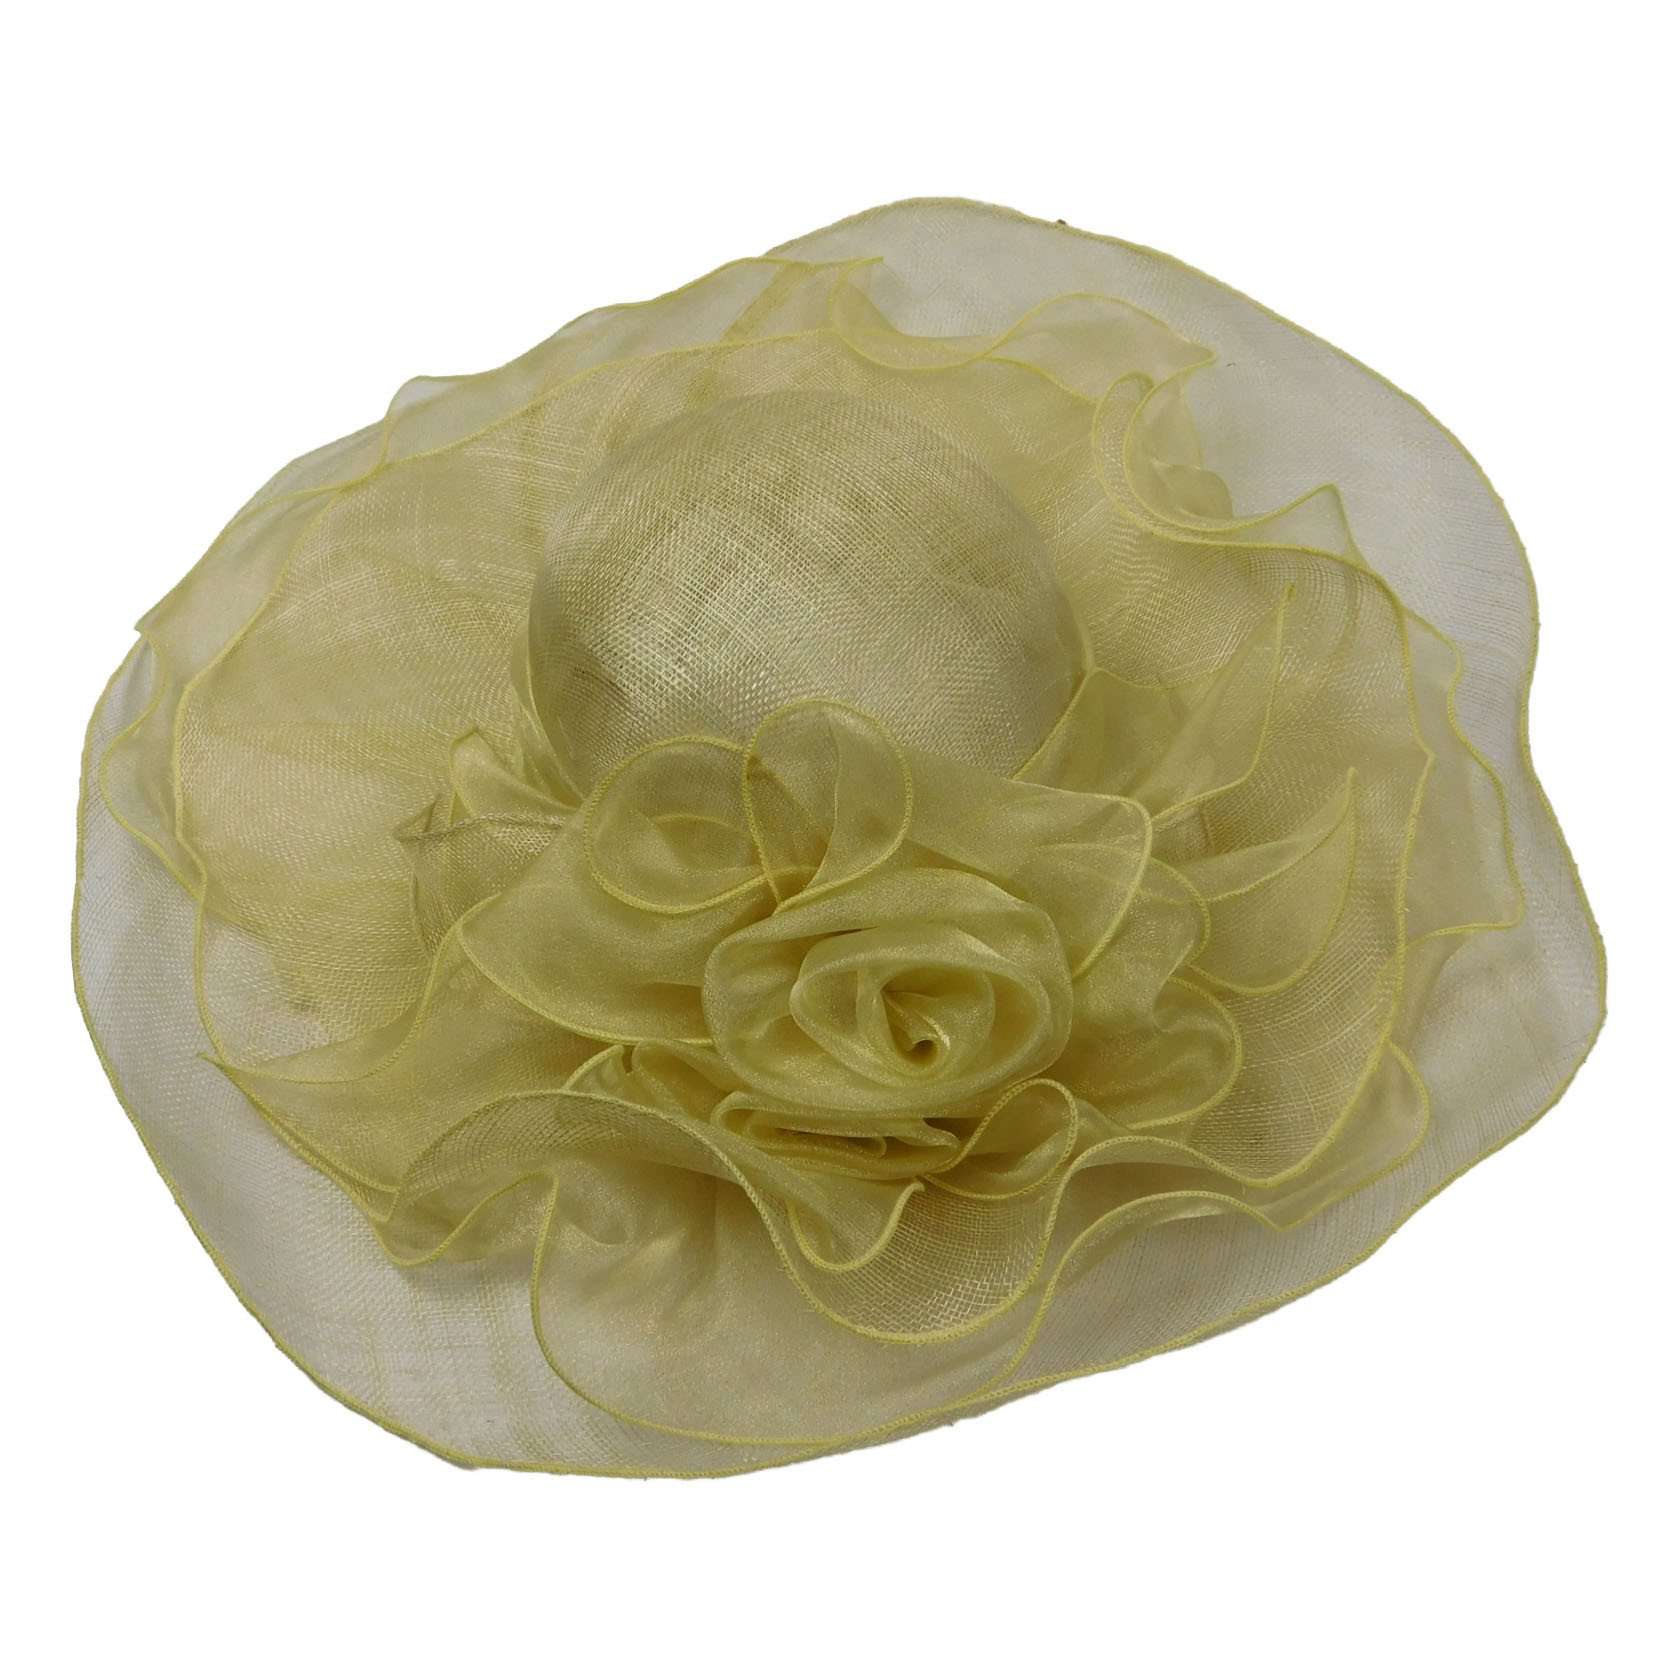 Sinamay Derby Hat with Ruffle Flower Accent Dress Hat Something Special LA WSSY786GD Gold  